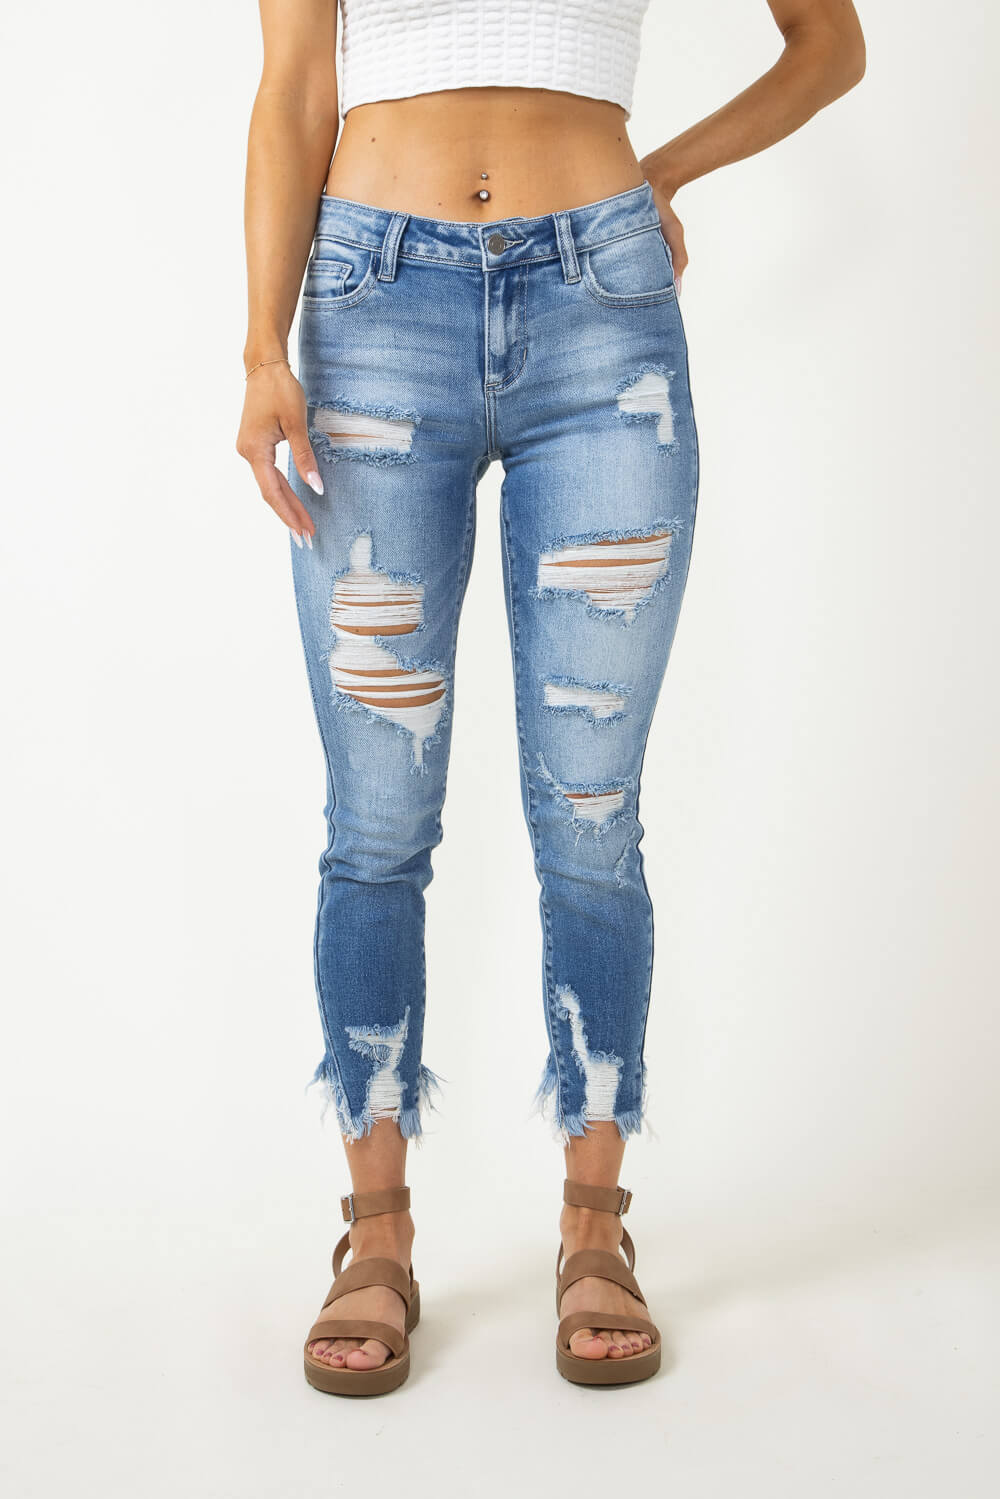 Bree - Blue High Waisted Ripped Skinny Jeans | Jeans | Miss G Couture